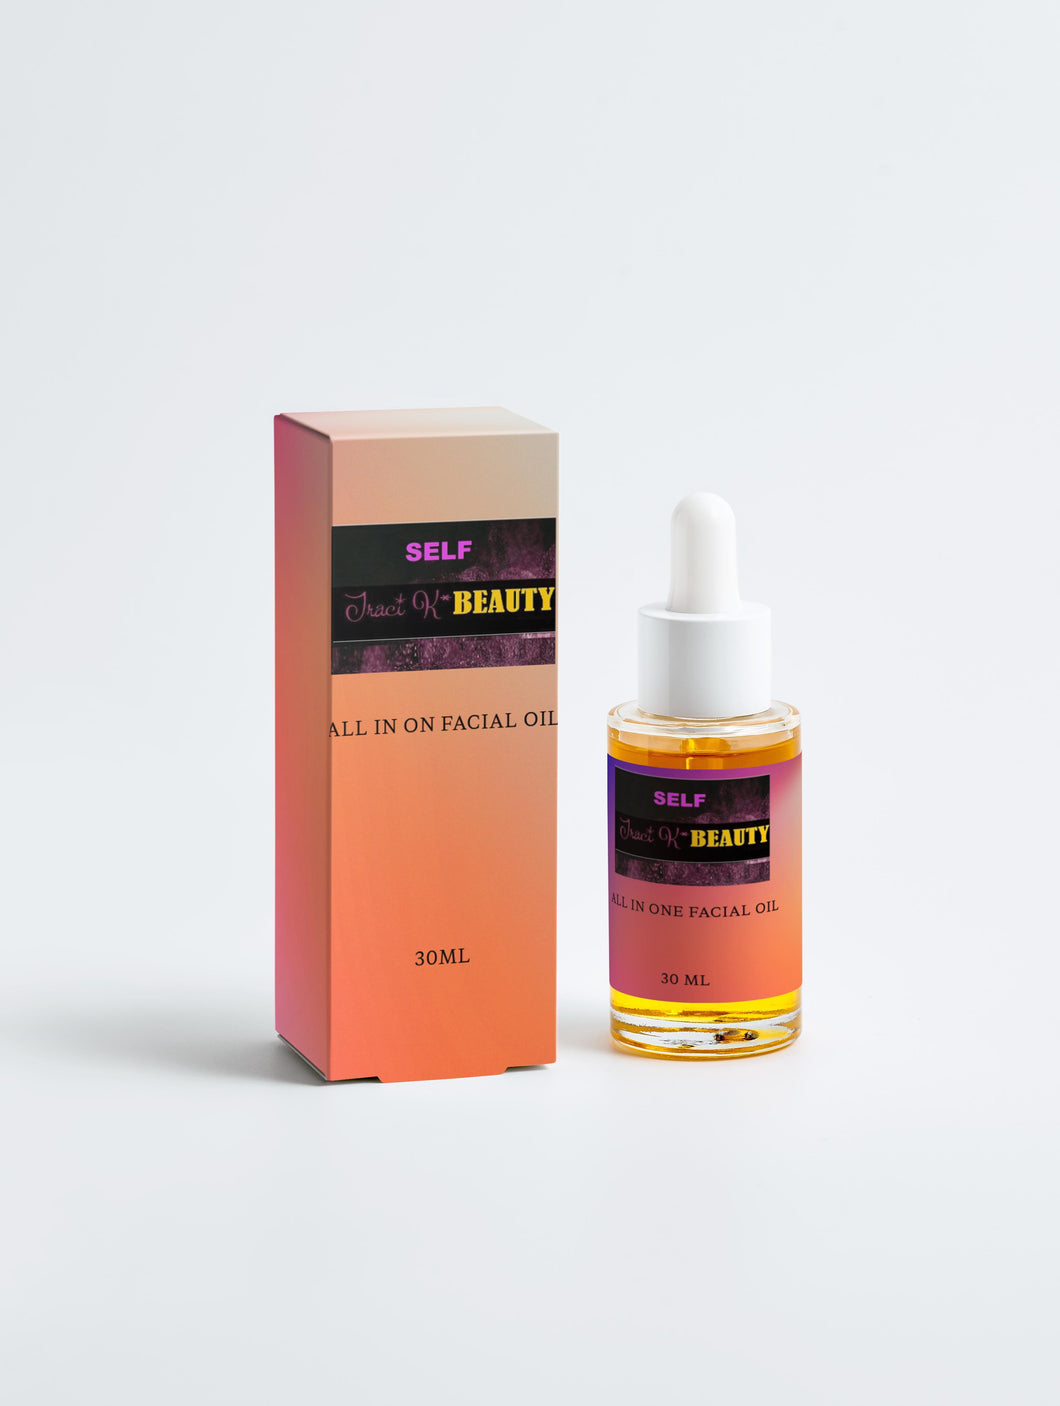 SELF- by Traci K Beauty All-In-One Facial Oil